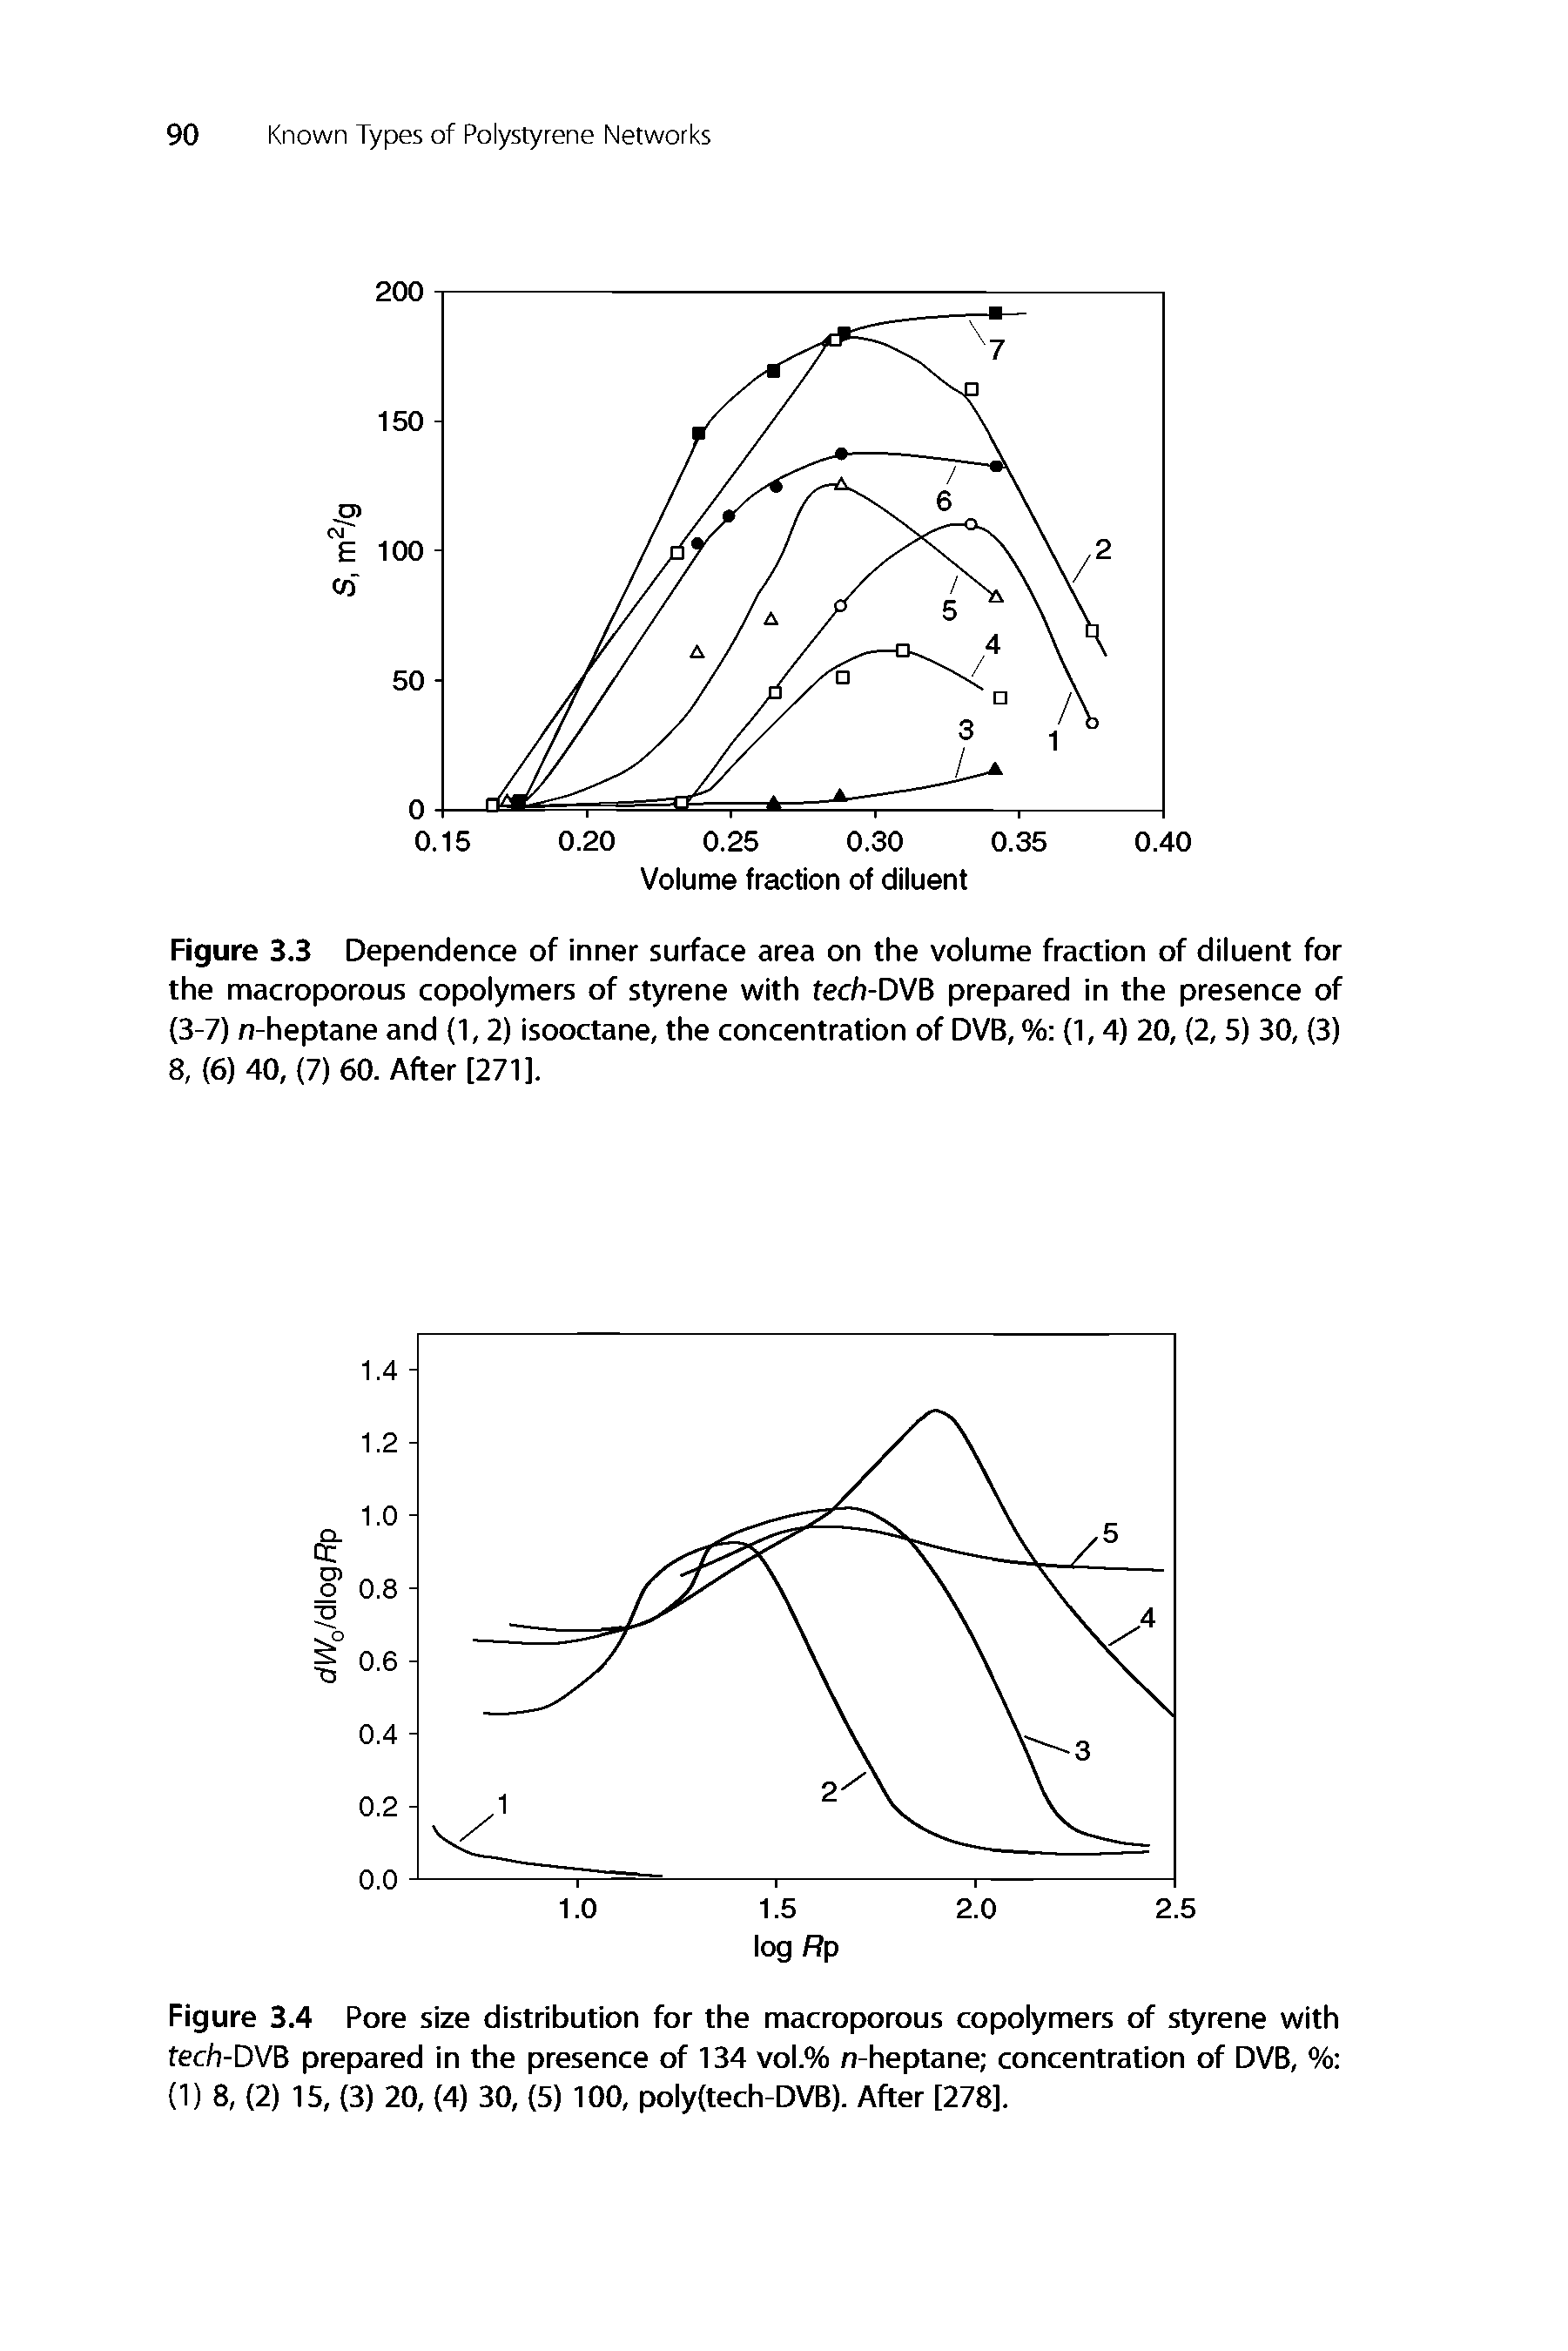 Figure 3.3 Dependence of inner surface area on the volume fraction of diluent for the macroporous copolymers of styrene with fech-DVB prepared in the presence of (3-7) f)-heptane and (1,2) isooctane, the concentration of DVB, % (1,4) 20, (2,5) 30, (3) 8, (6) 40, (7) 60. After [271],...